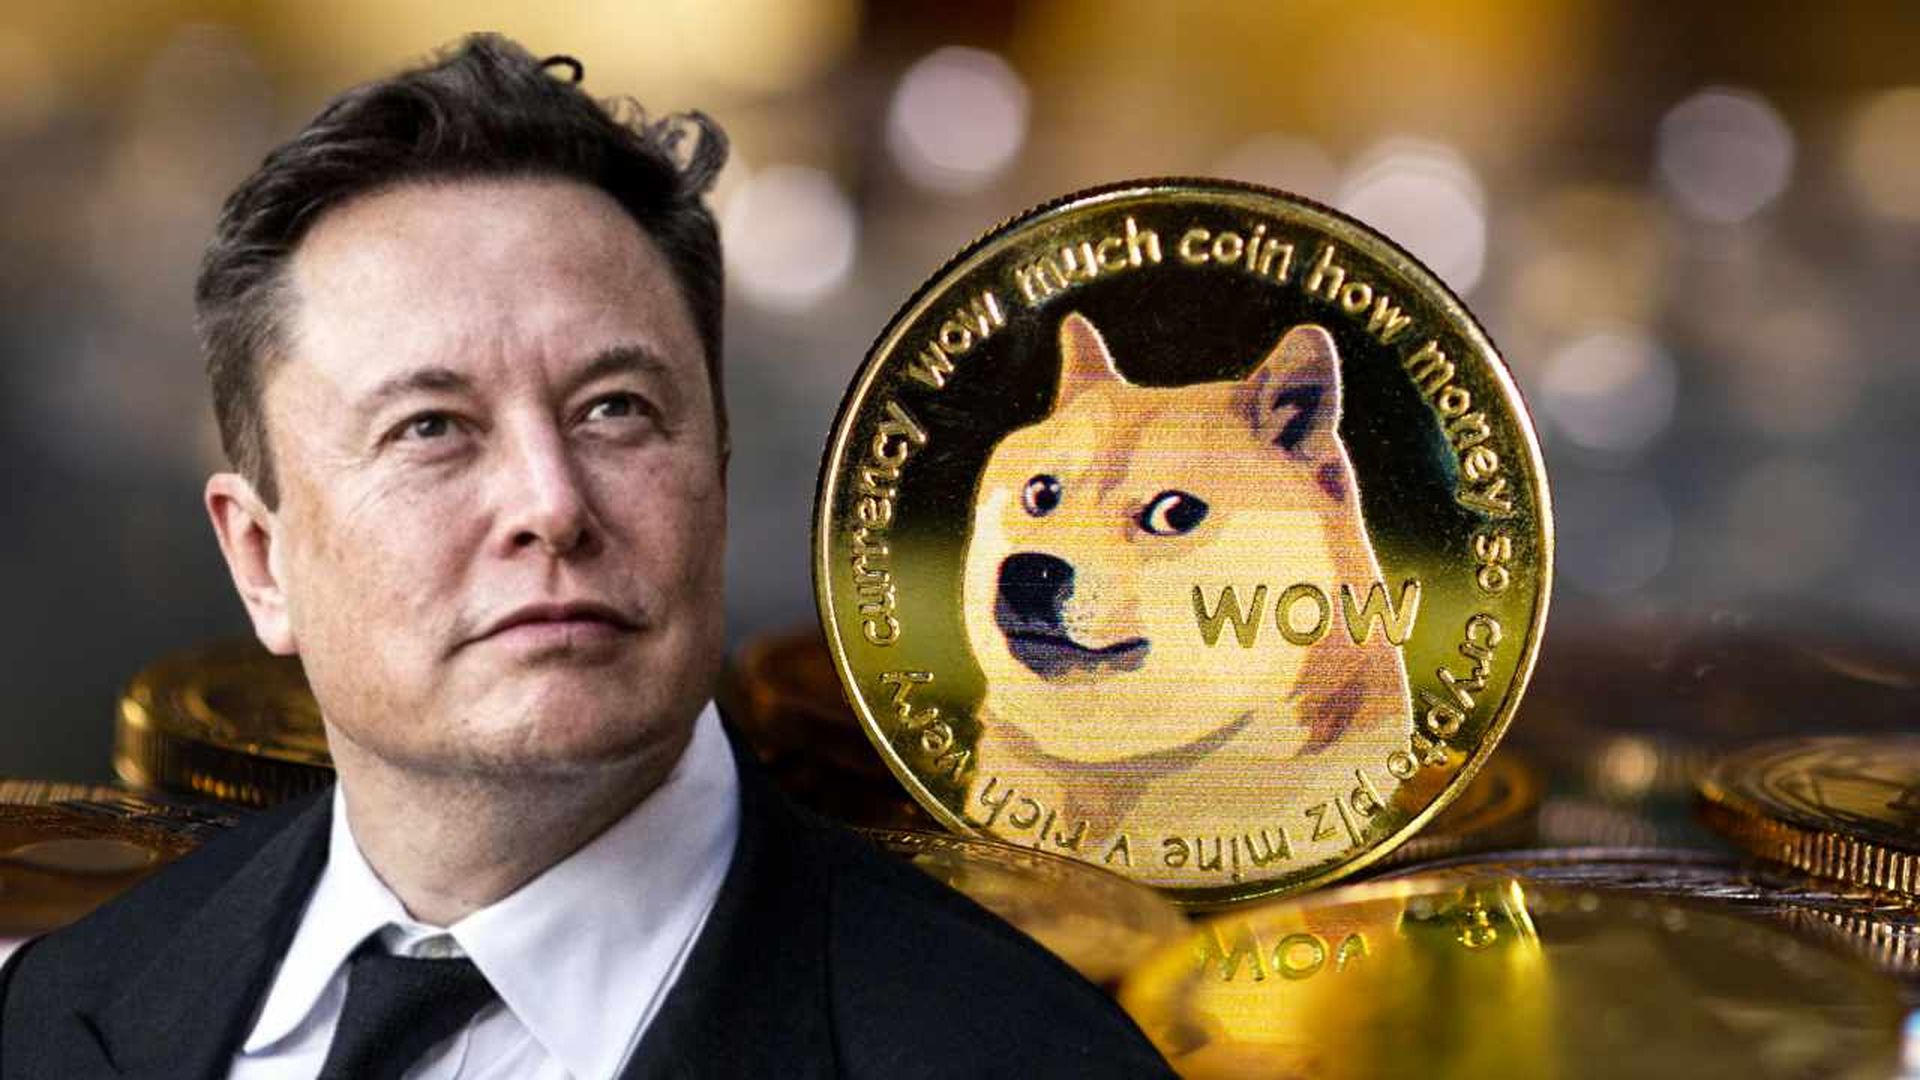 In this article, we are going to go over Elon Musk sued over claims of Dogecoin pyramid scheme, and answer the question is Dogecoin a pyramid scheme.